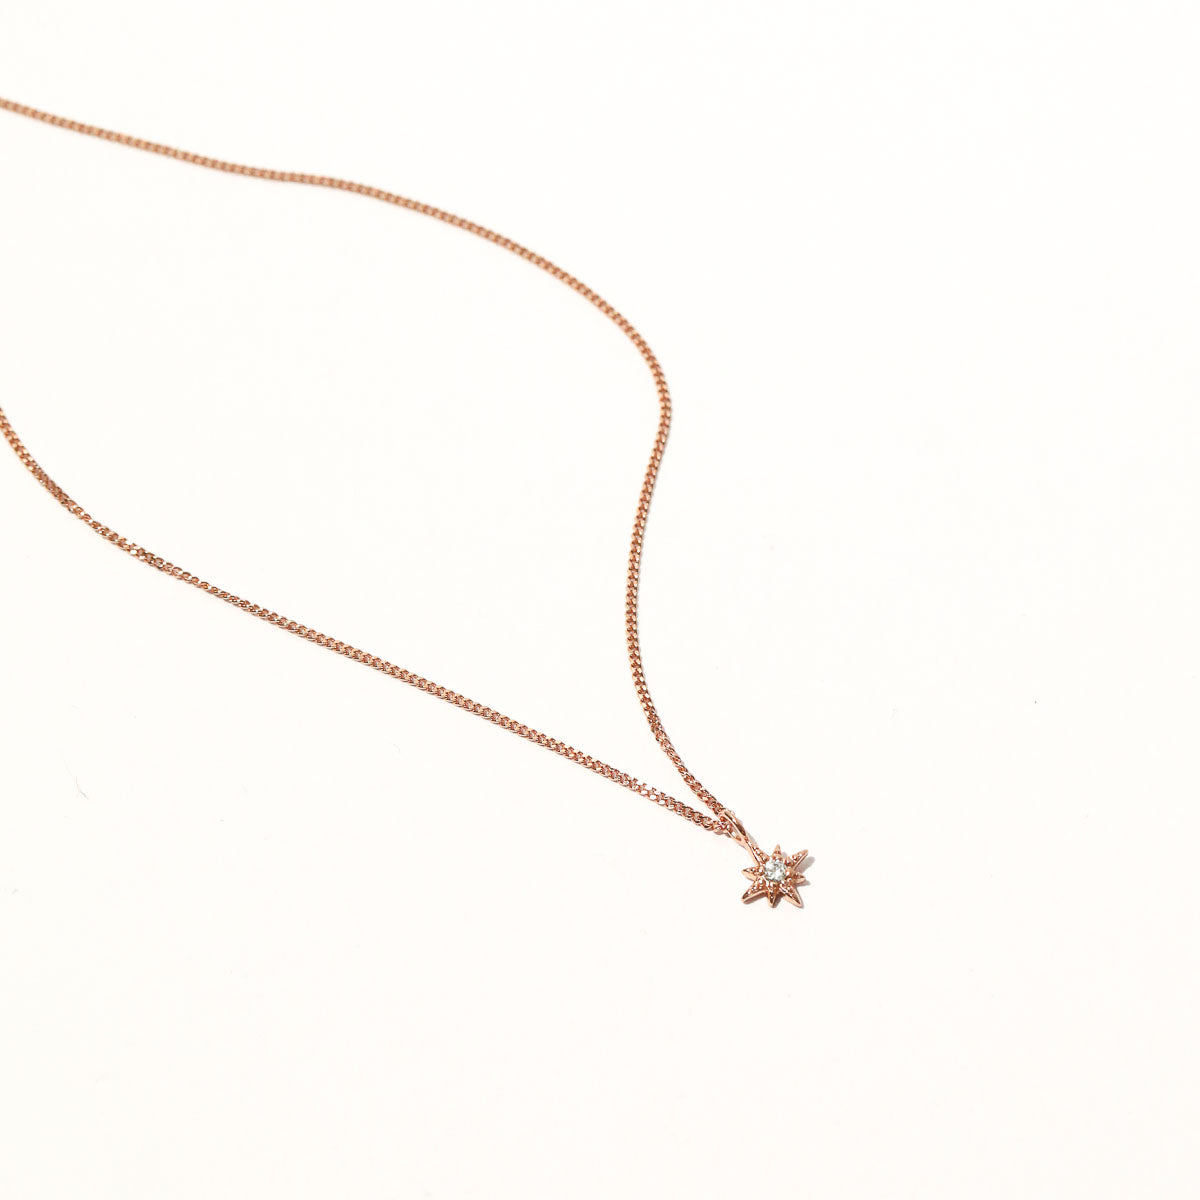 Twilight Star Pendant Necklace in Rose Gold flat lay